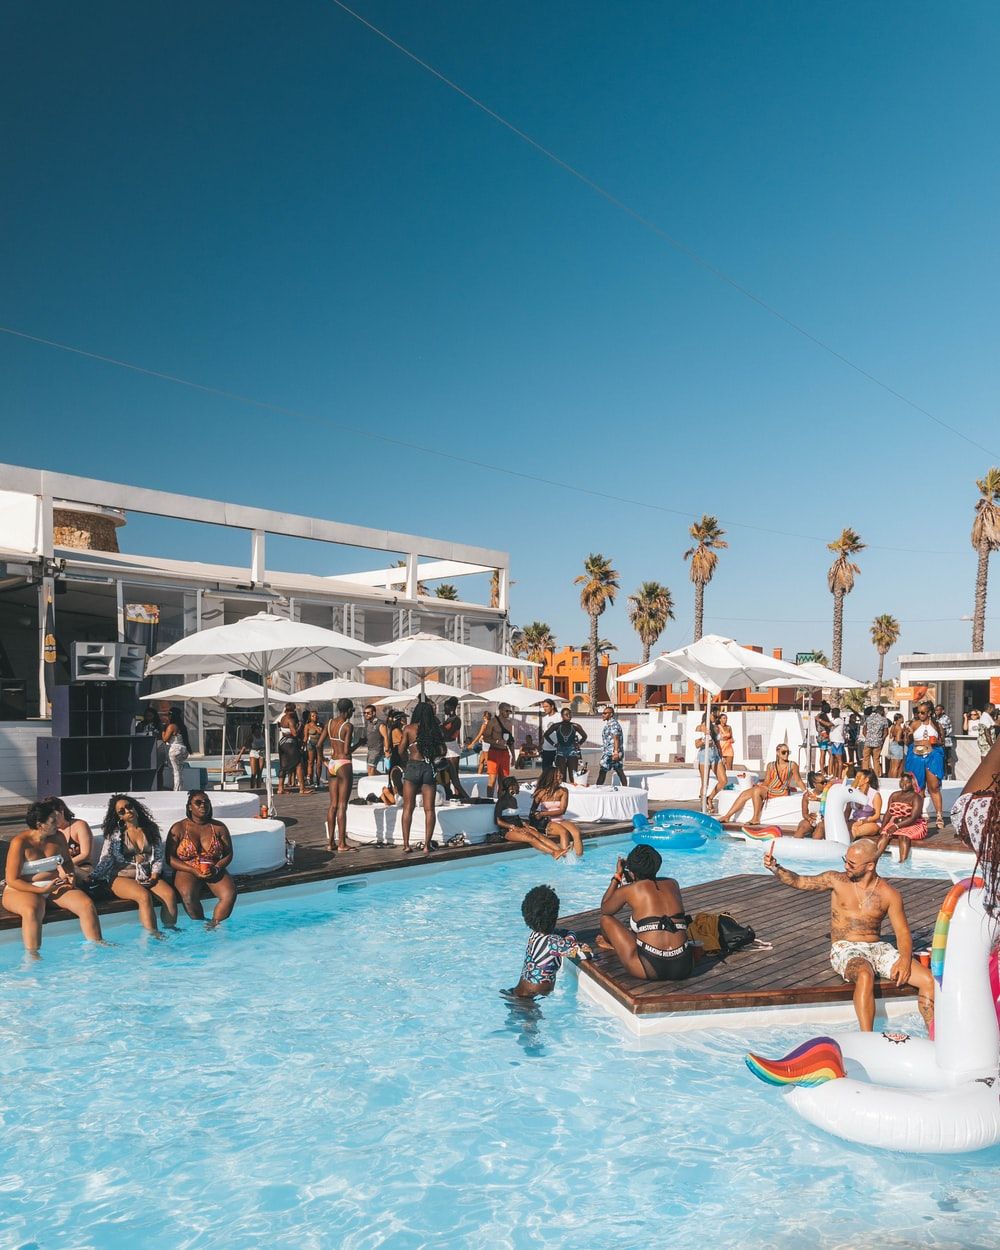 Pool Party Picture [HD]. Download Free Image